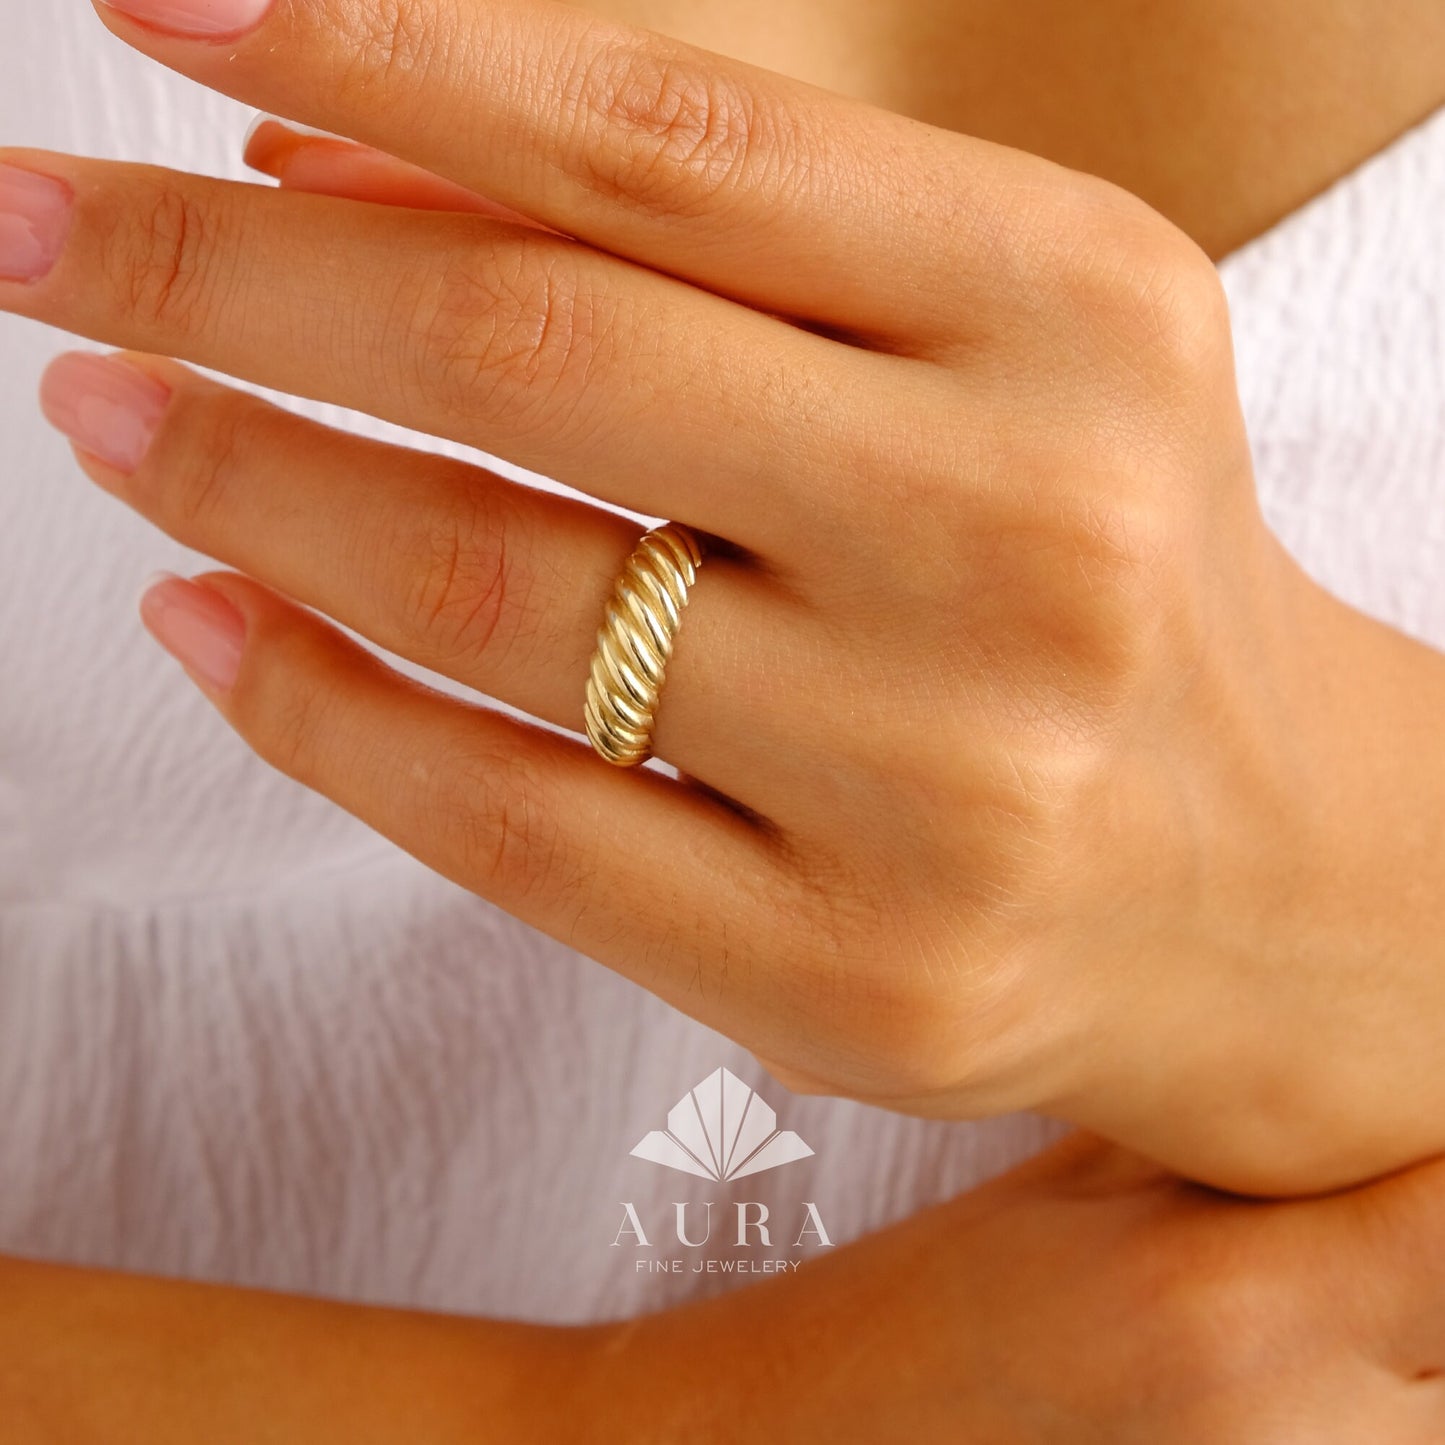 14K Gold Croissant Ring, Croissant Wedding Band, Dainty Twist Ring, Statement Ring, Infinity Twisted Thumb Band, Classic Dome Ring Gift